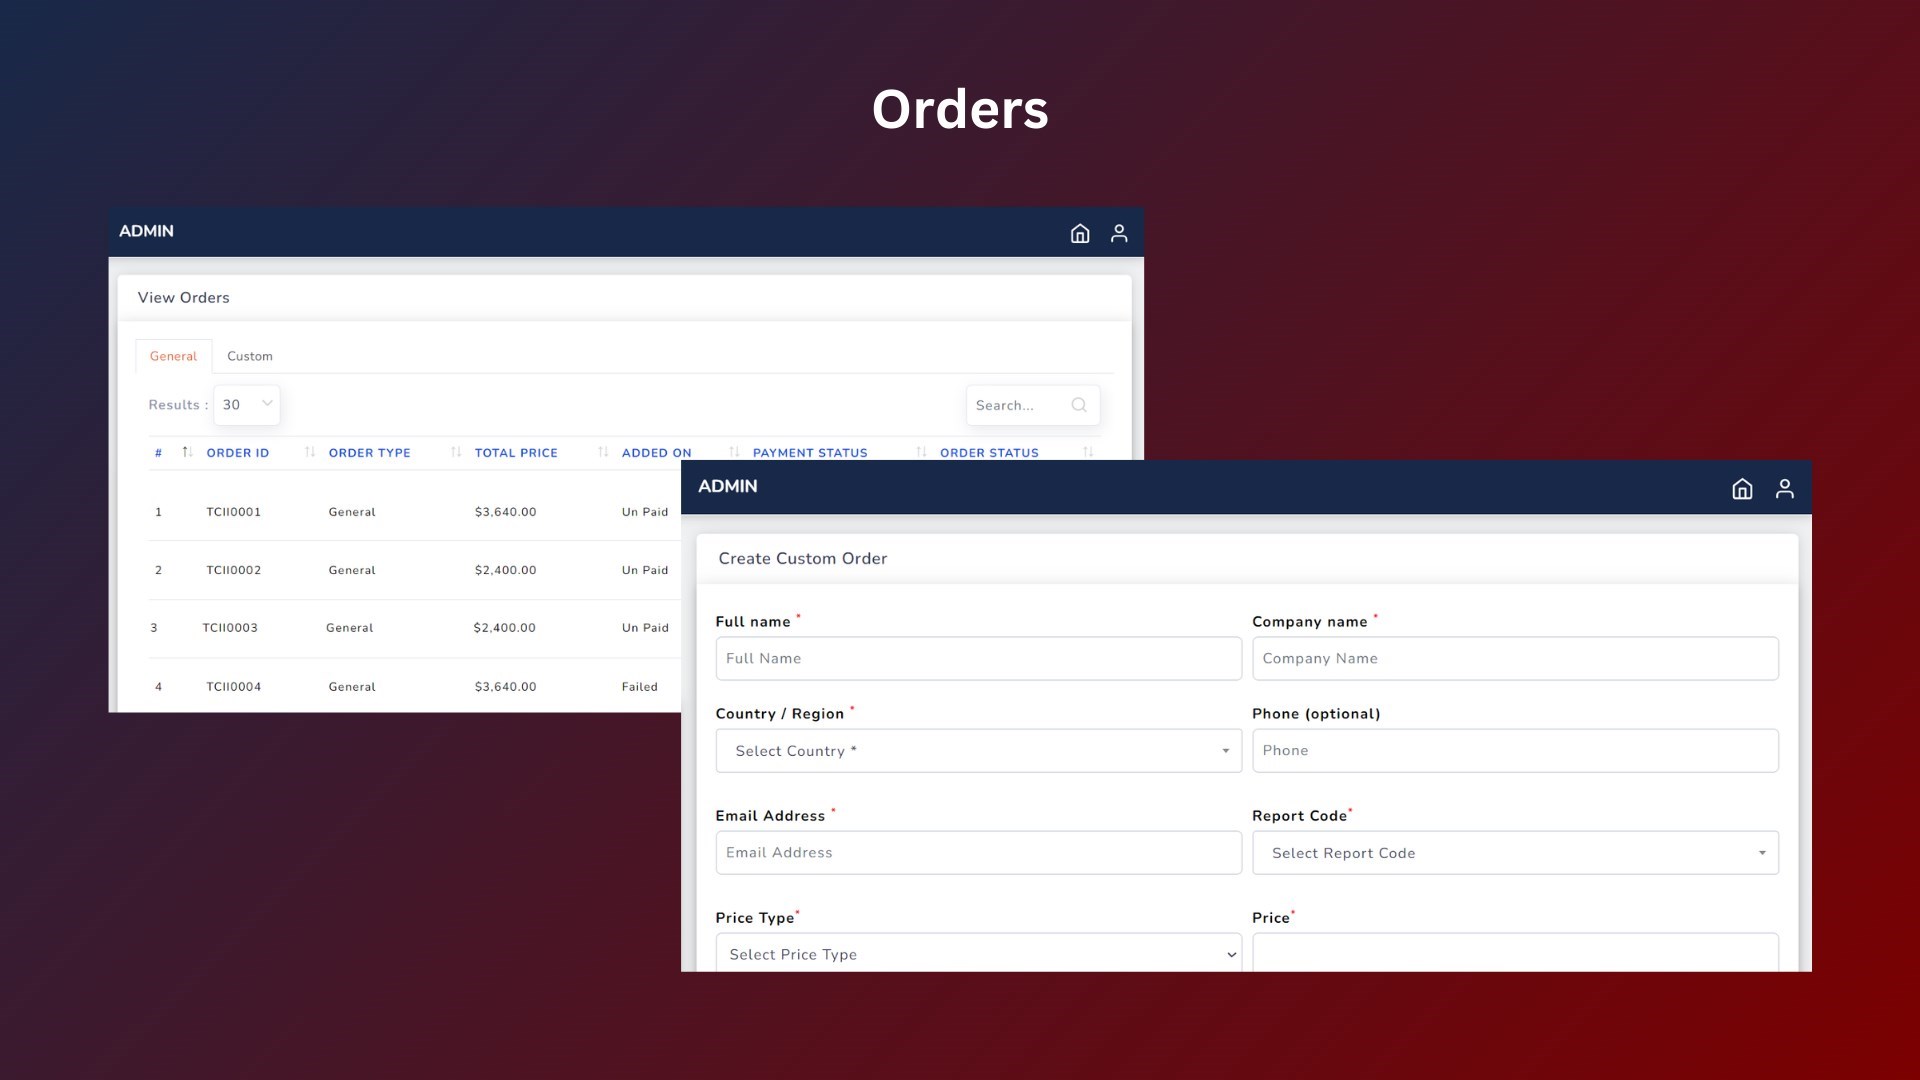 Feature to view all placed orders and create custom orders for offline purchase of reports.